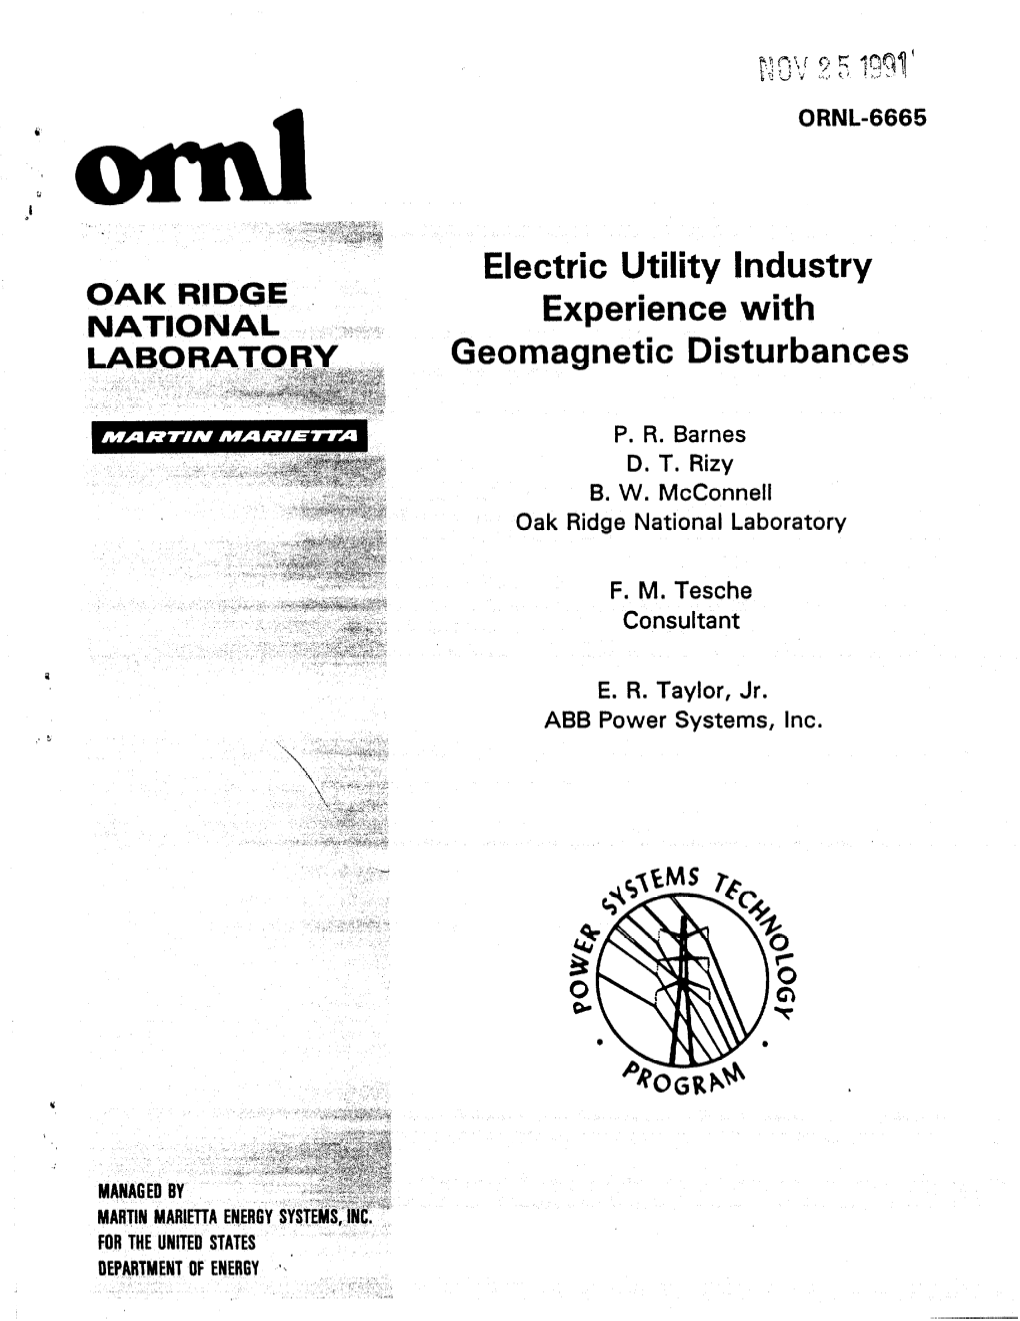 Electric Utility Experience Industry with Geomagnetic Disturbances